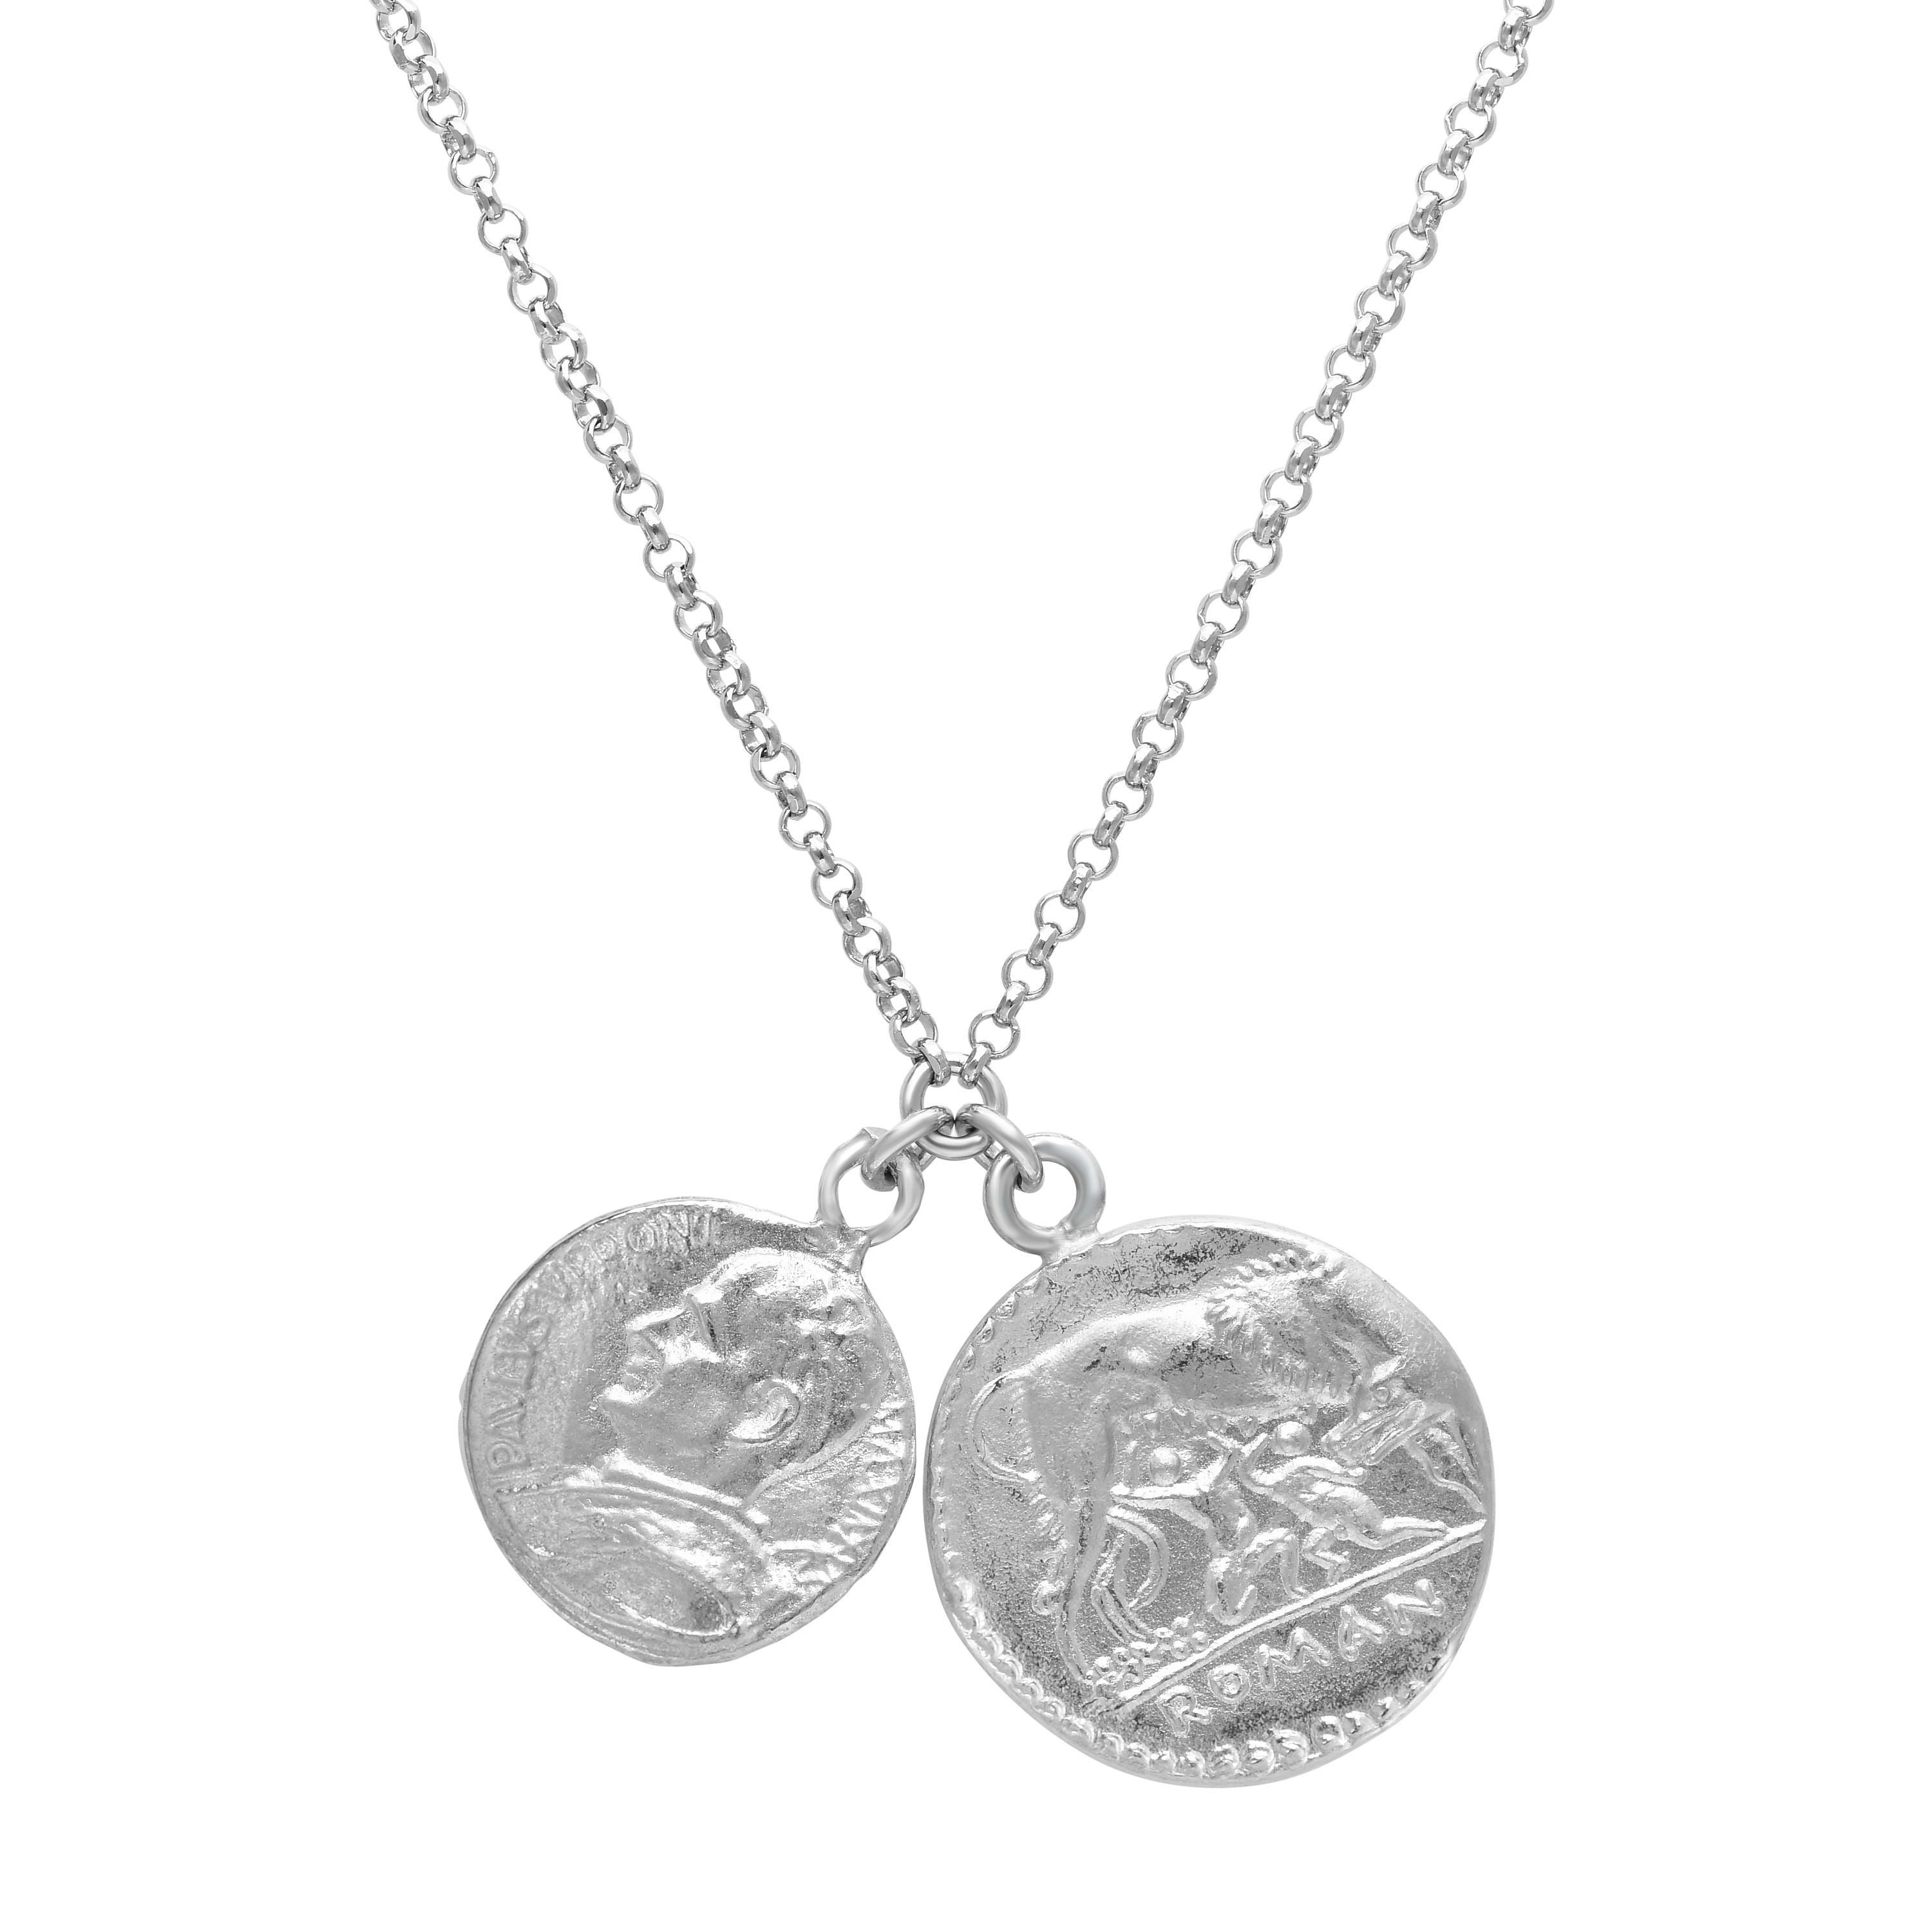 Sterling Silver Multi Roman Coin Charms Necklace, 18" fine designer jewelry for men and women